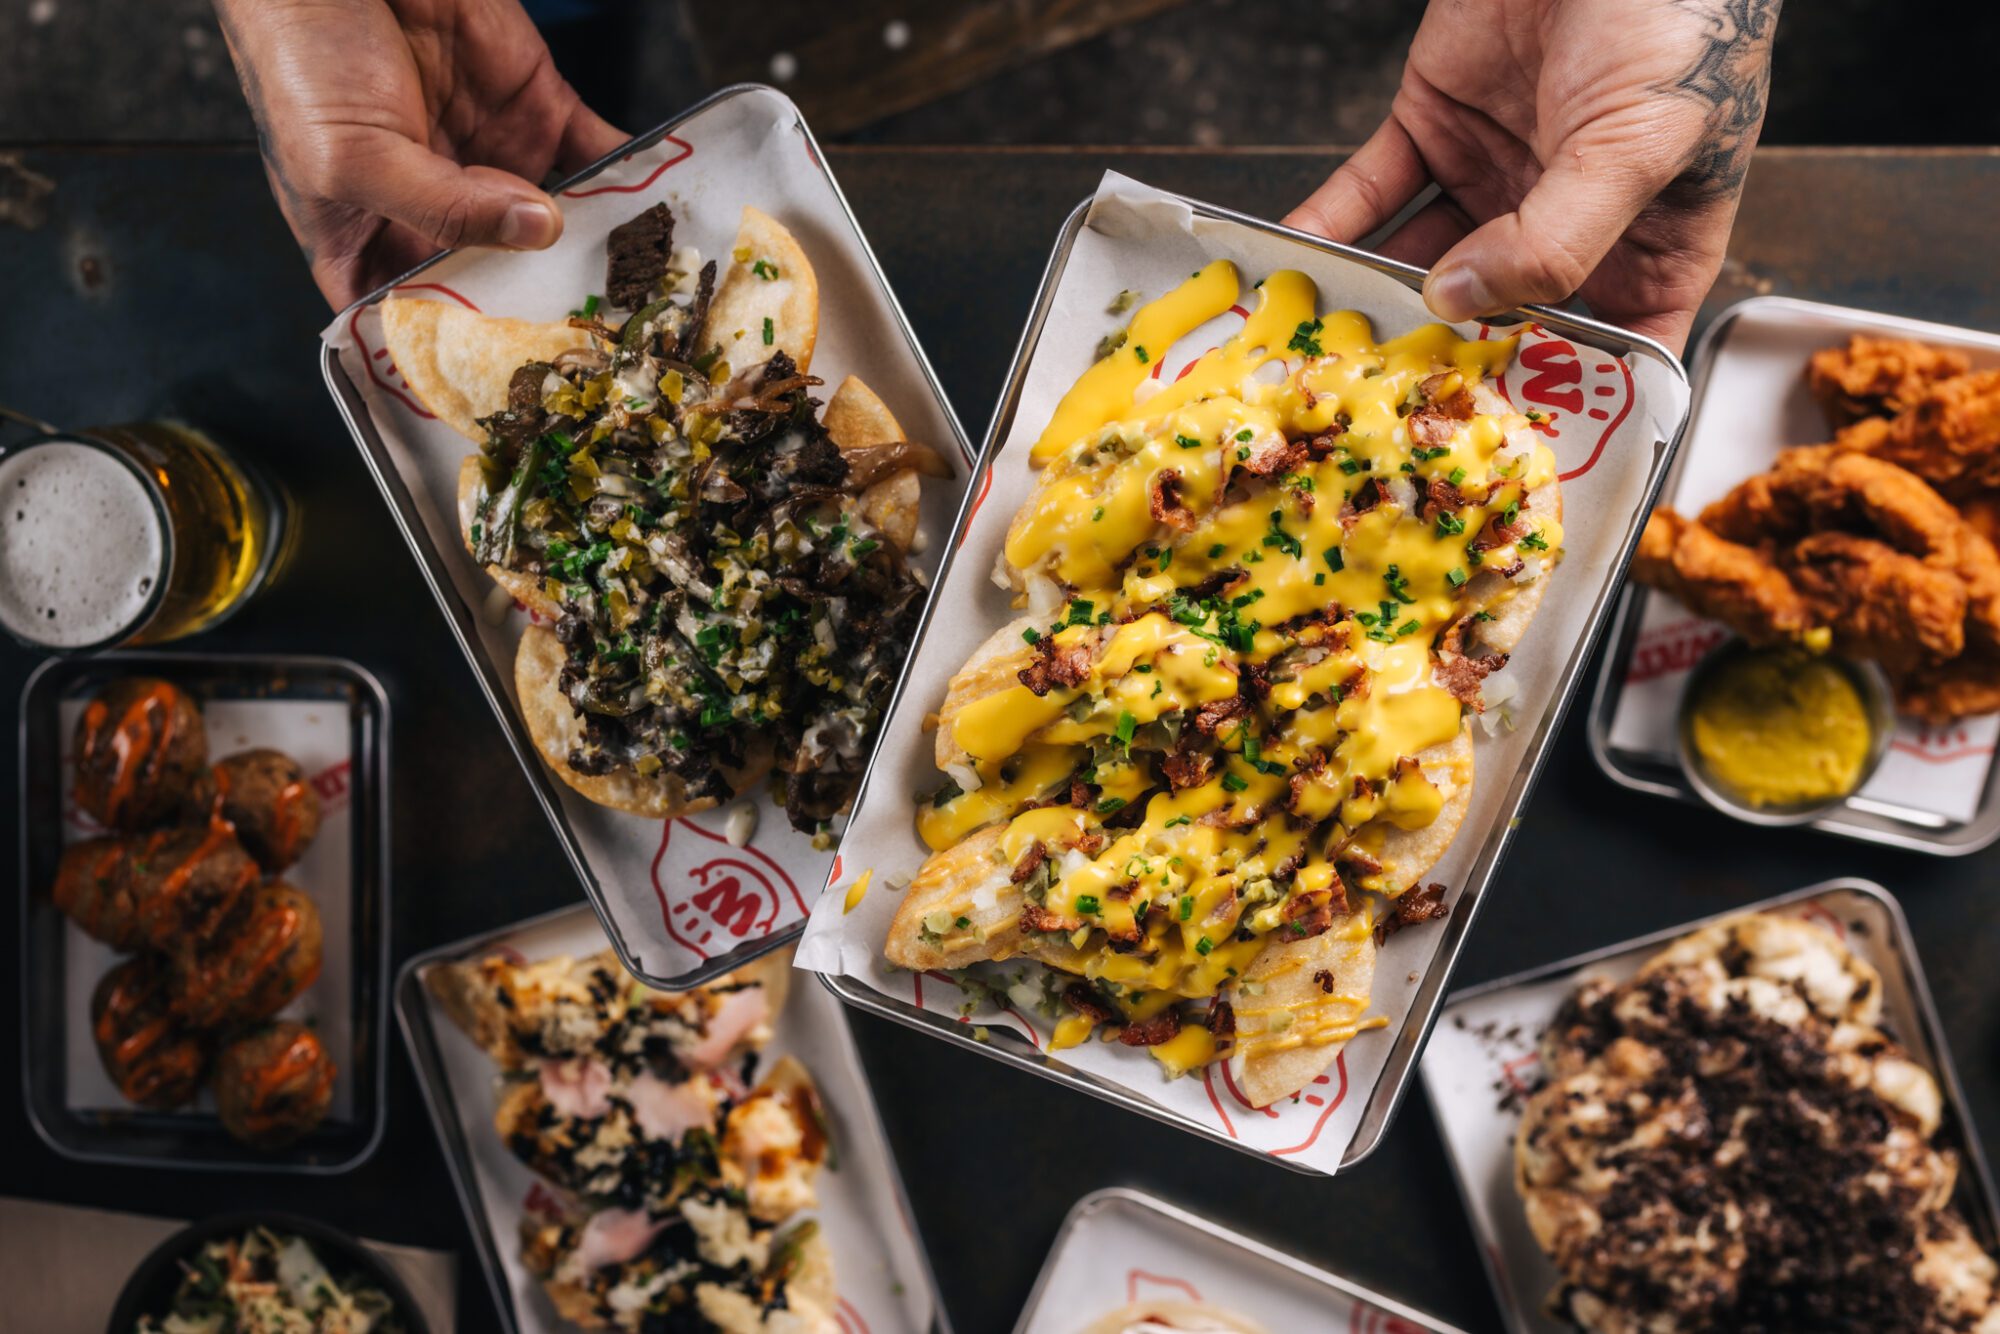 A mouthwatering loaded dumpling joint has just opened in Ponsonby